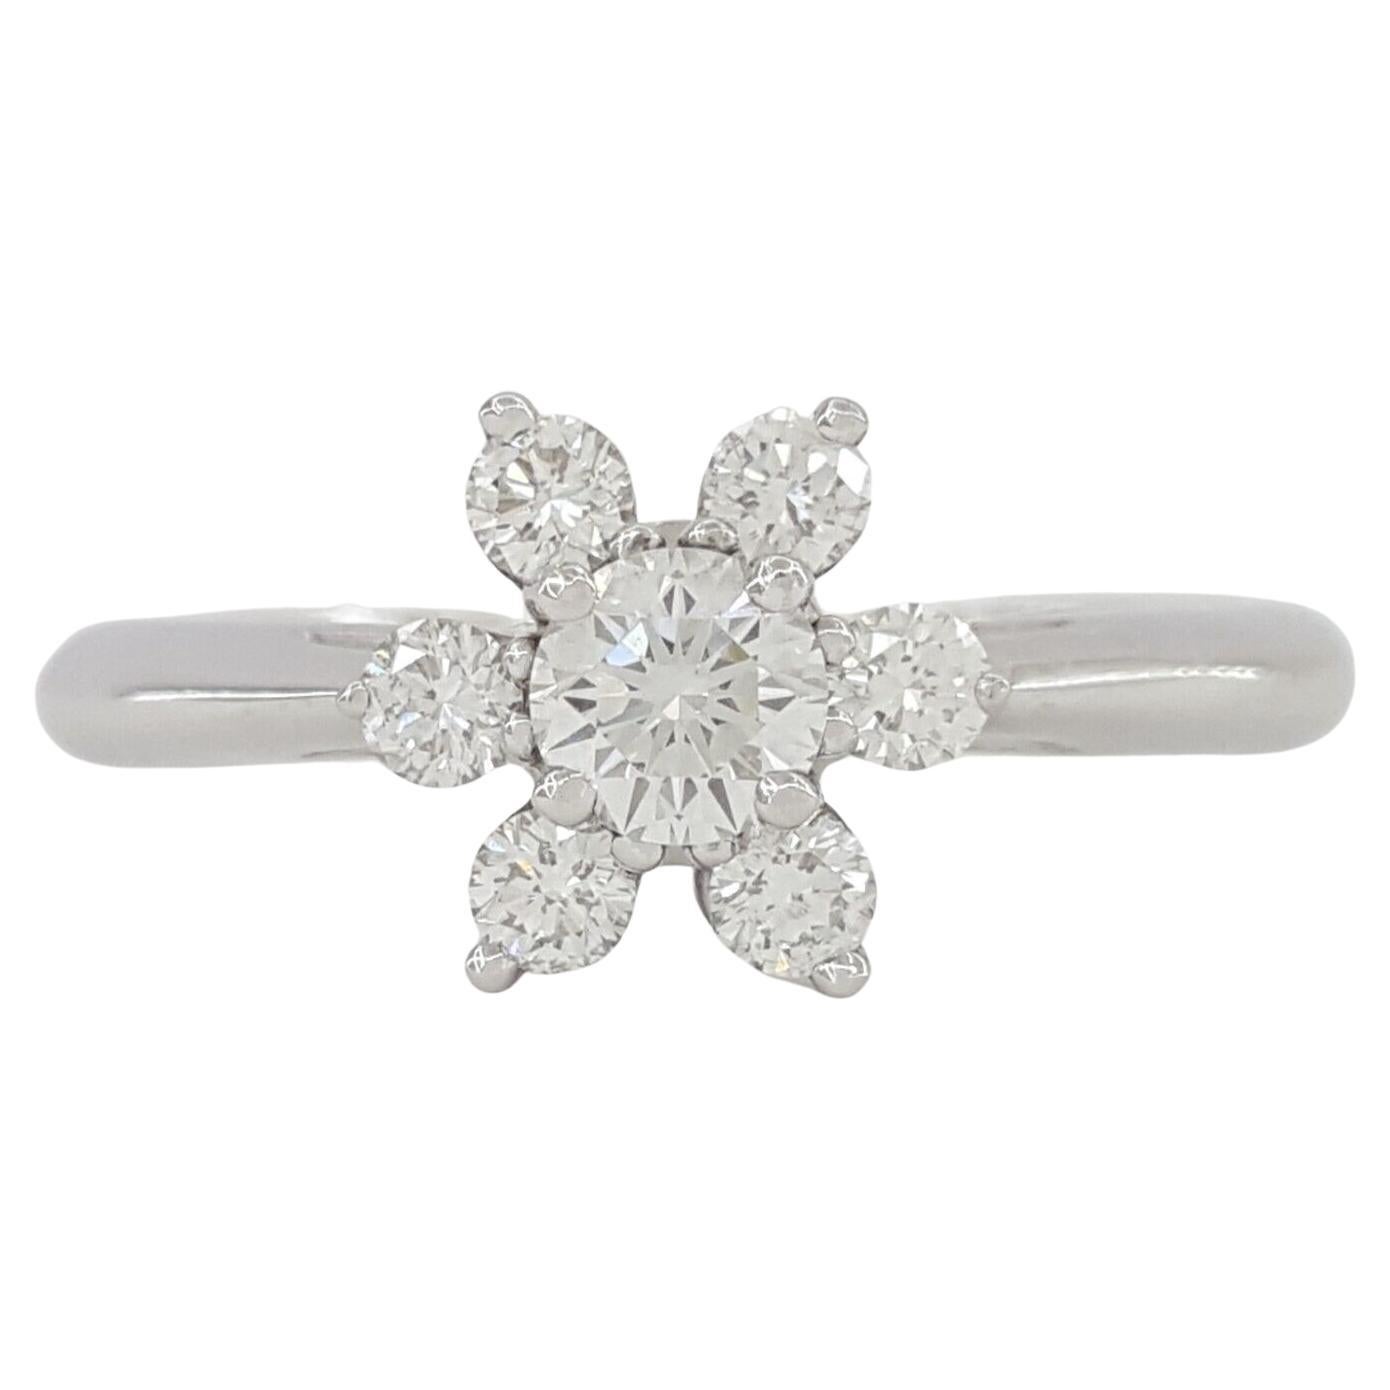  Tiffany & Co. 0.5 ct Total Weight Platinum Diamond Flower Ring. 


